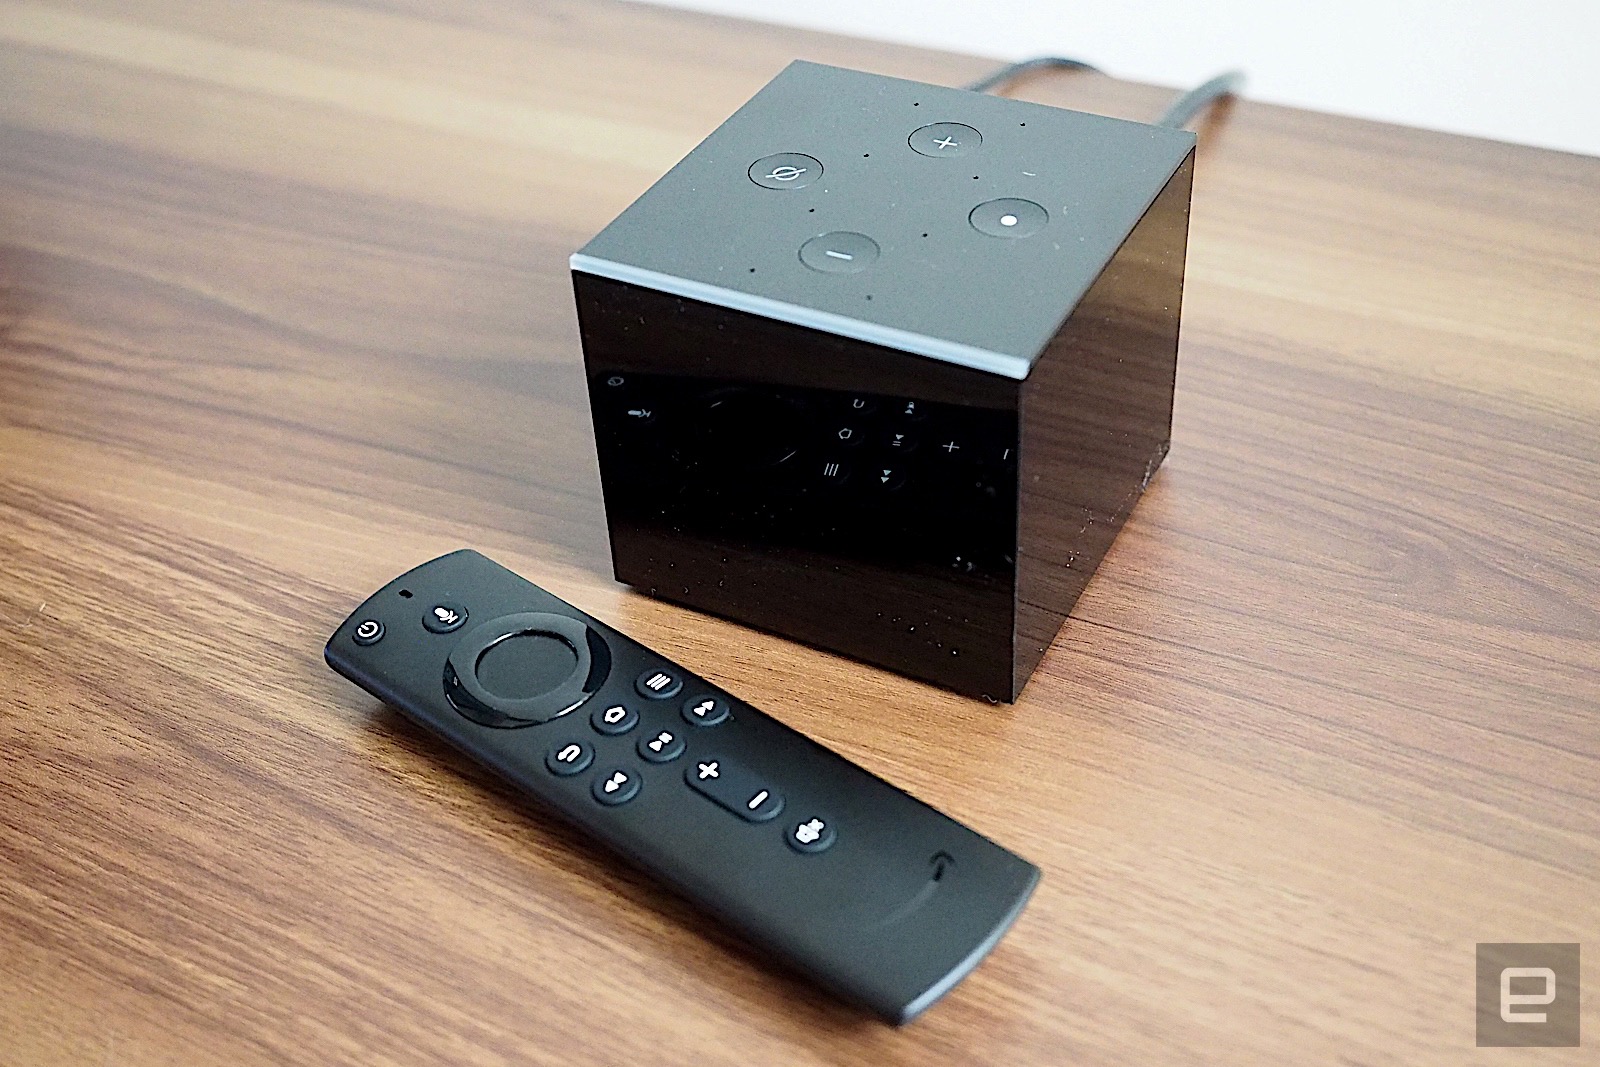 Amazon’s Fire TV Cube is assist on sale for $100